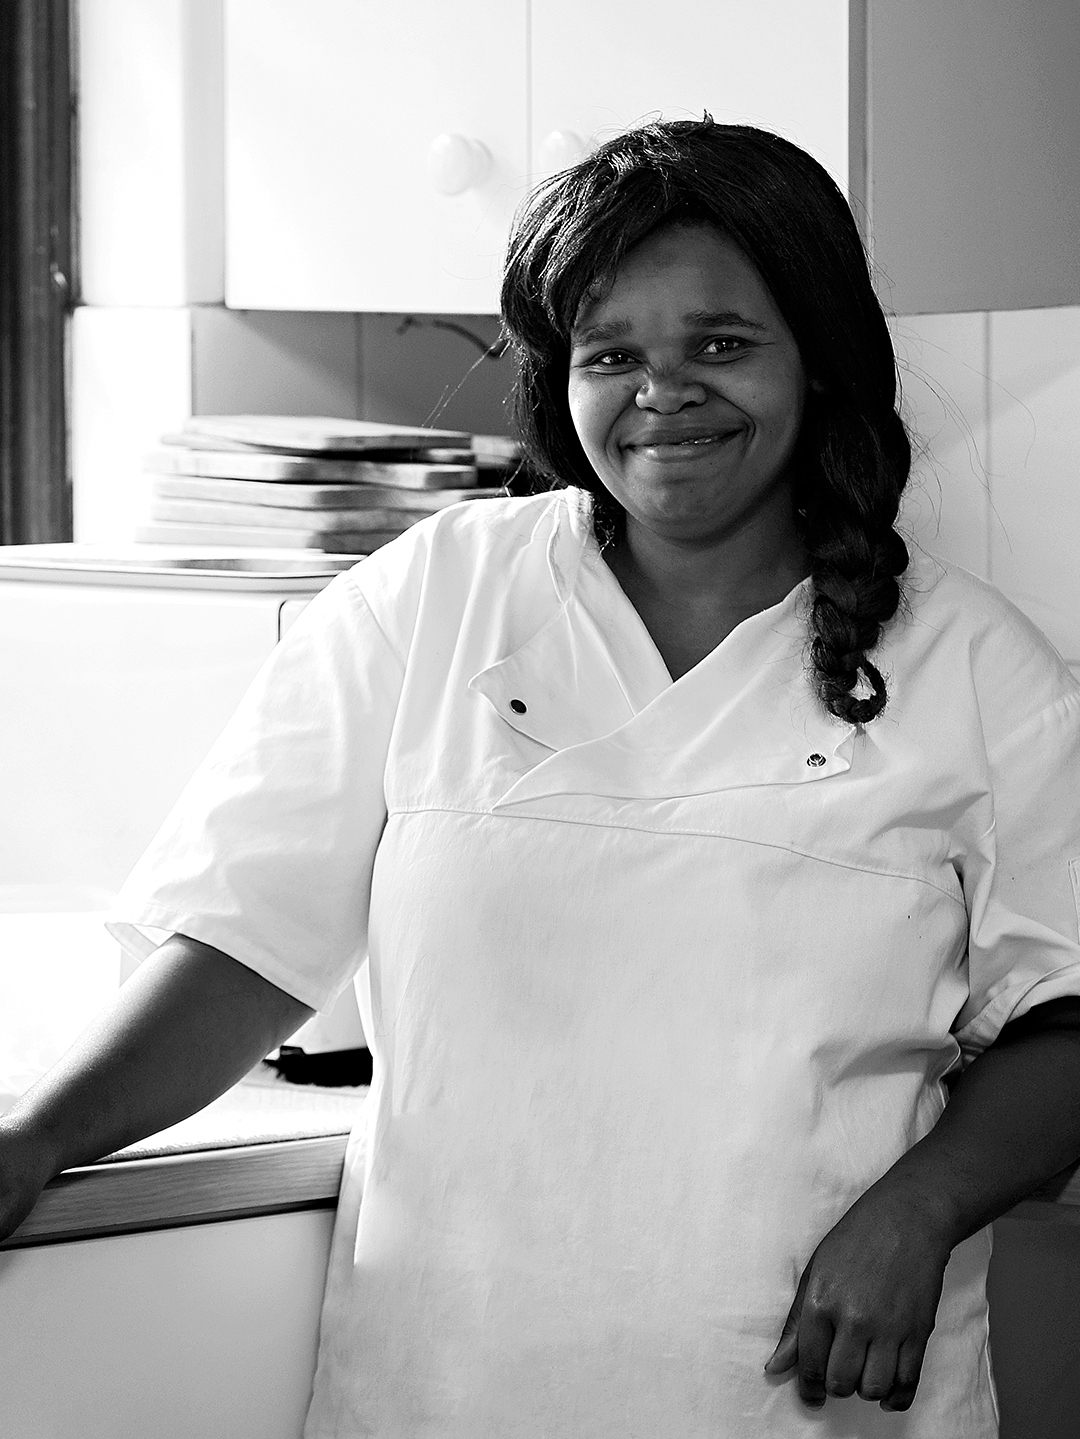 A smiling Elephant House staff member in the kitchen.